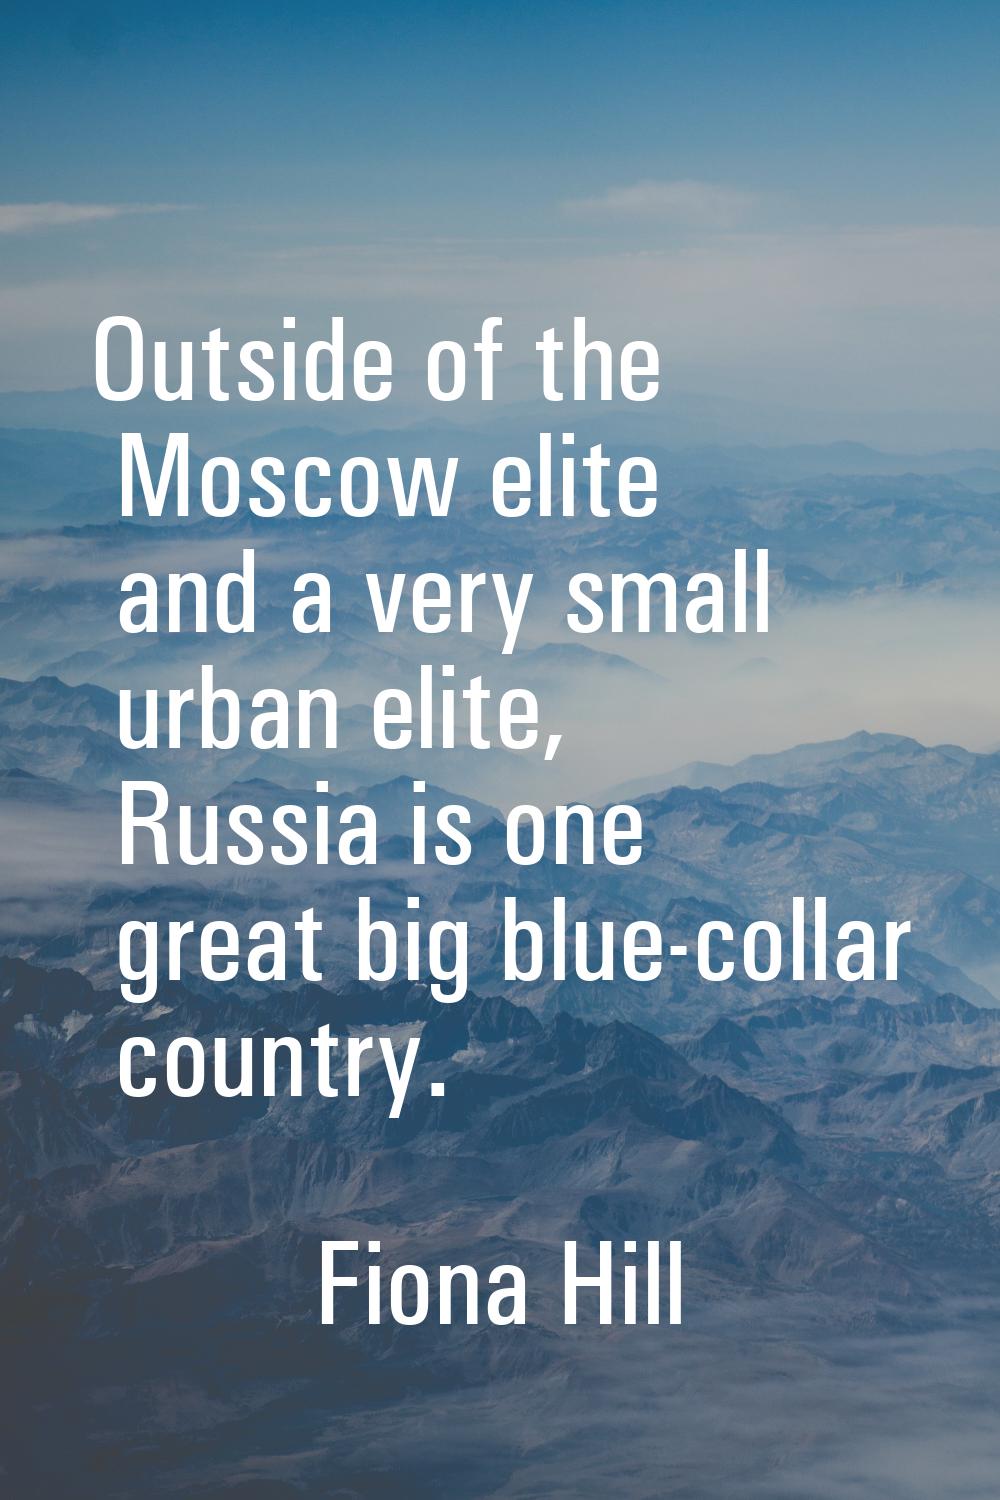 Outside of the Moscow elite and a very small urban elite, Russia is one great big blue-collar count